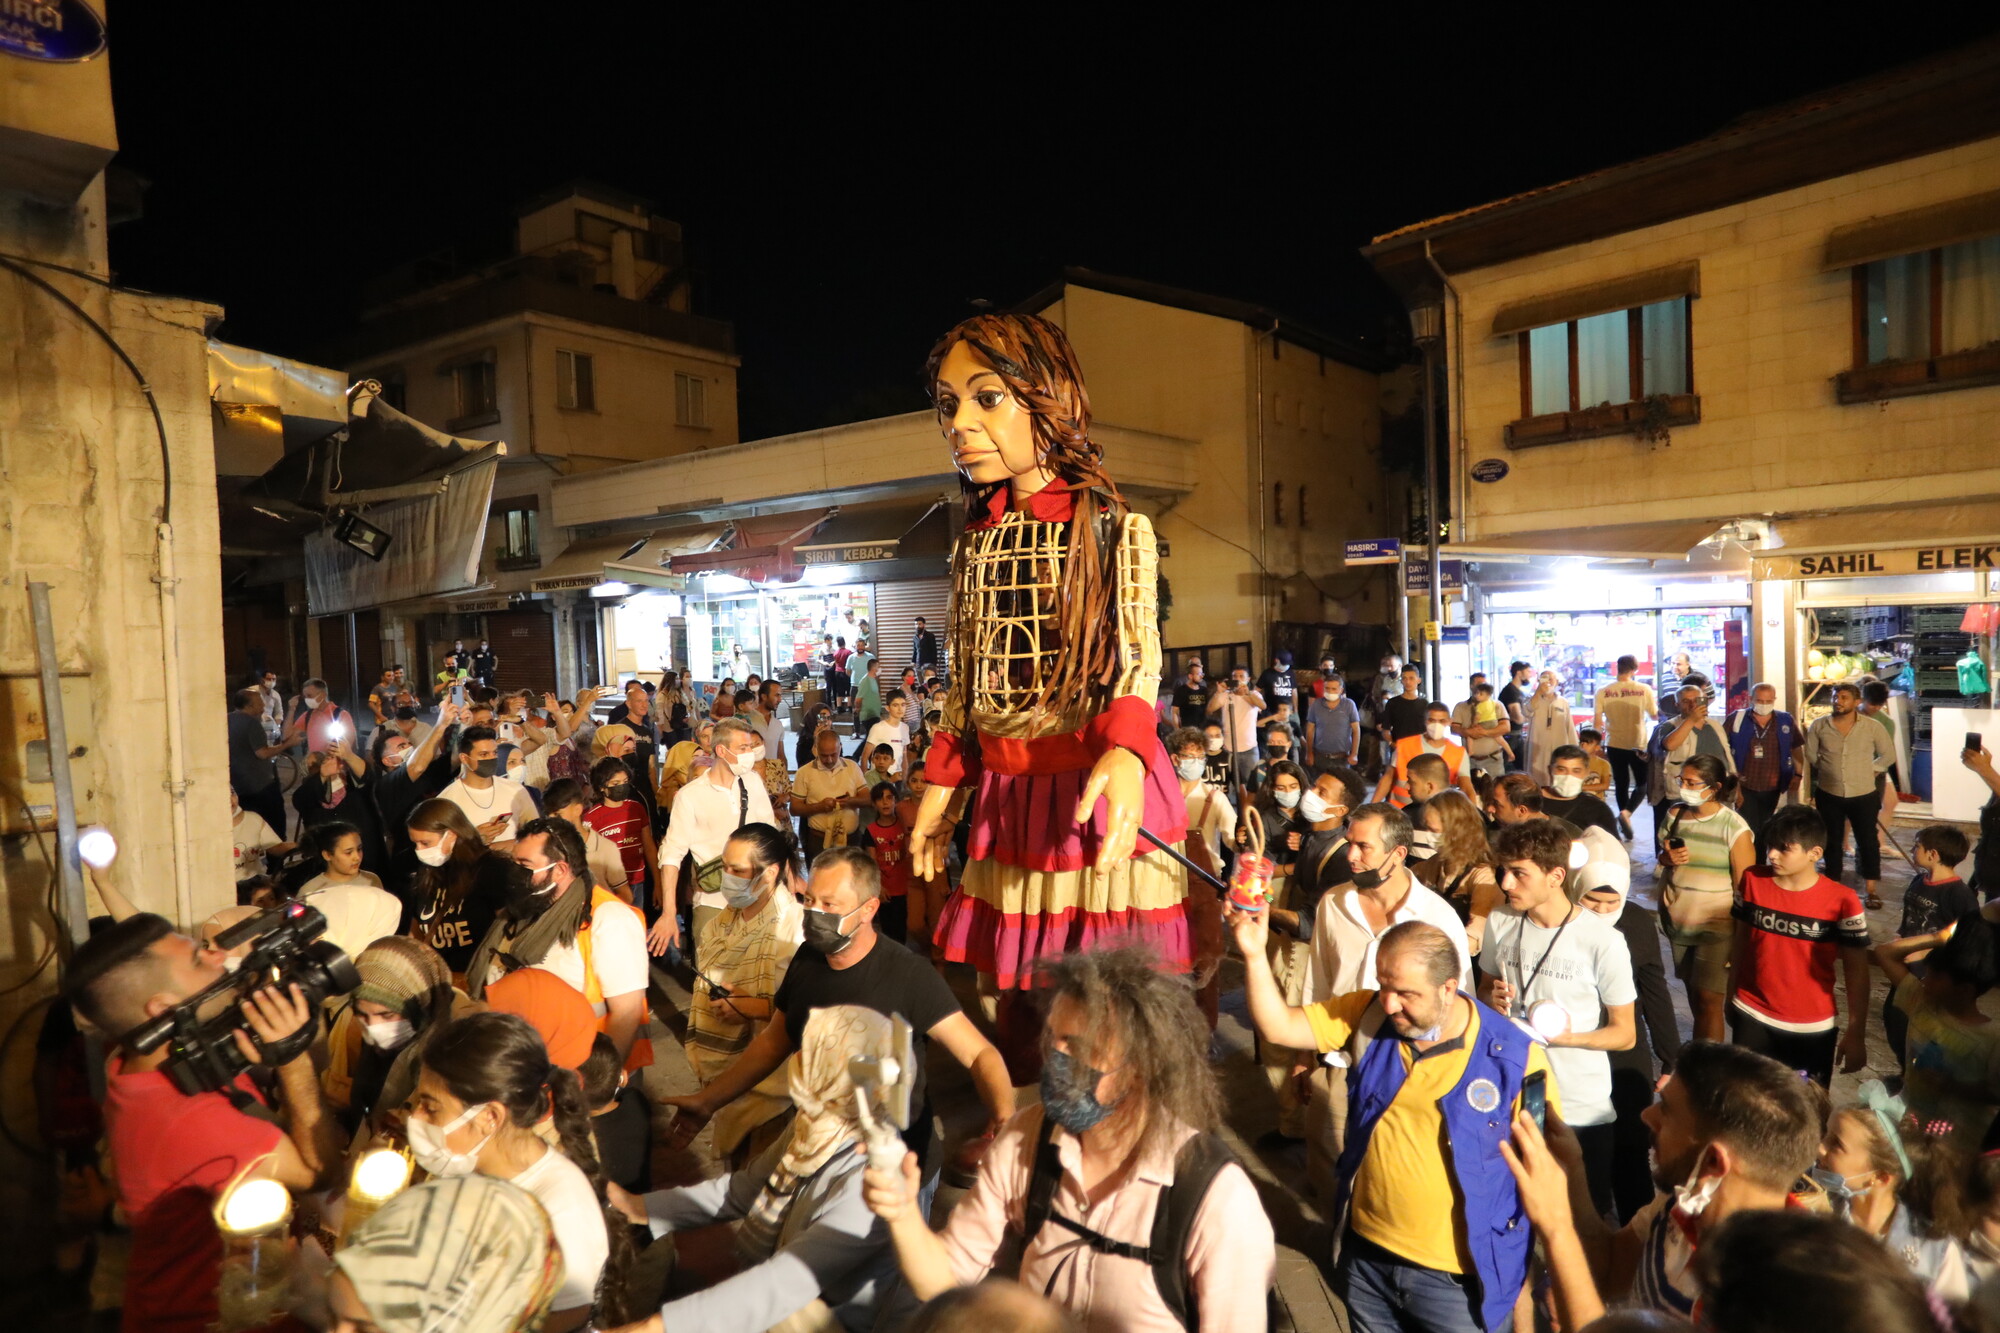 Life-sized internally operated puppet standing in the middle of a crowd.